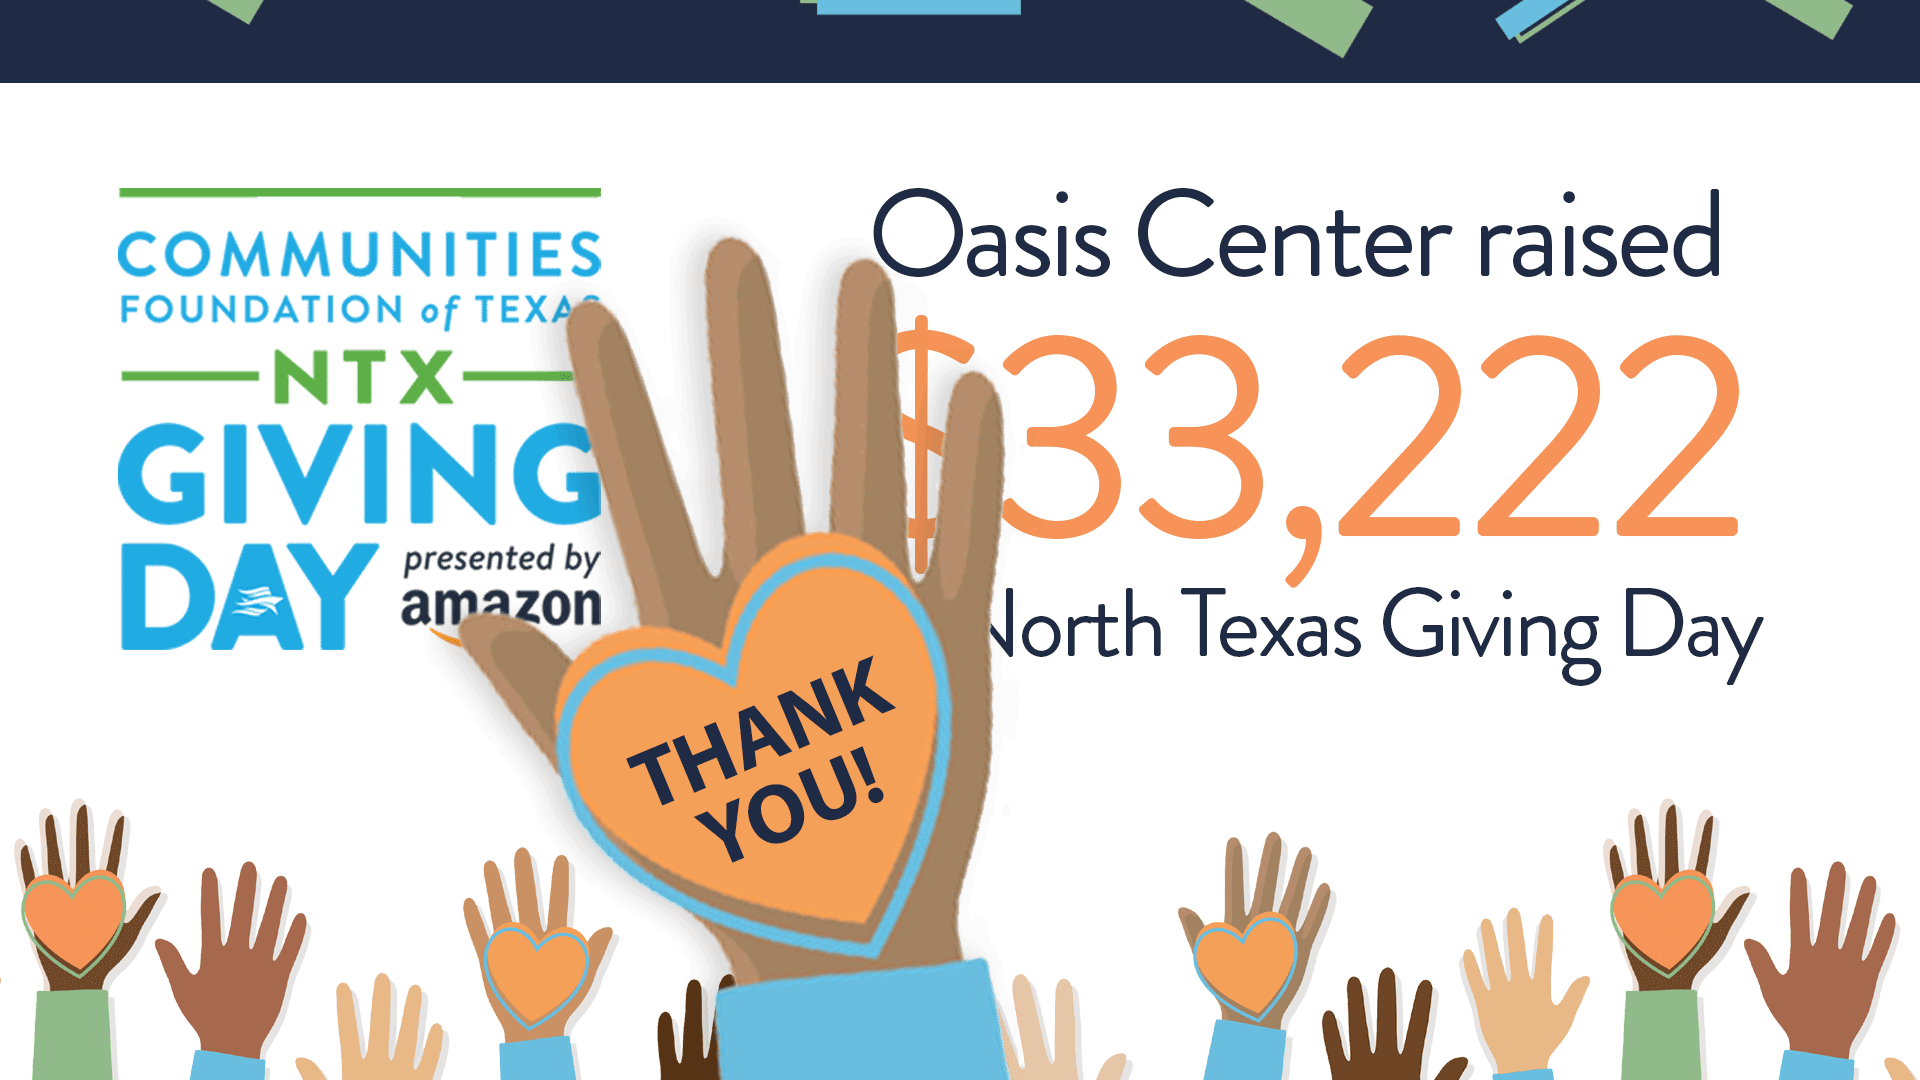 Oasis Center North Texas Giving Day Thank You ANIMATED